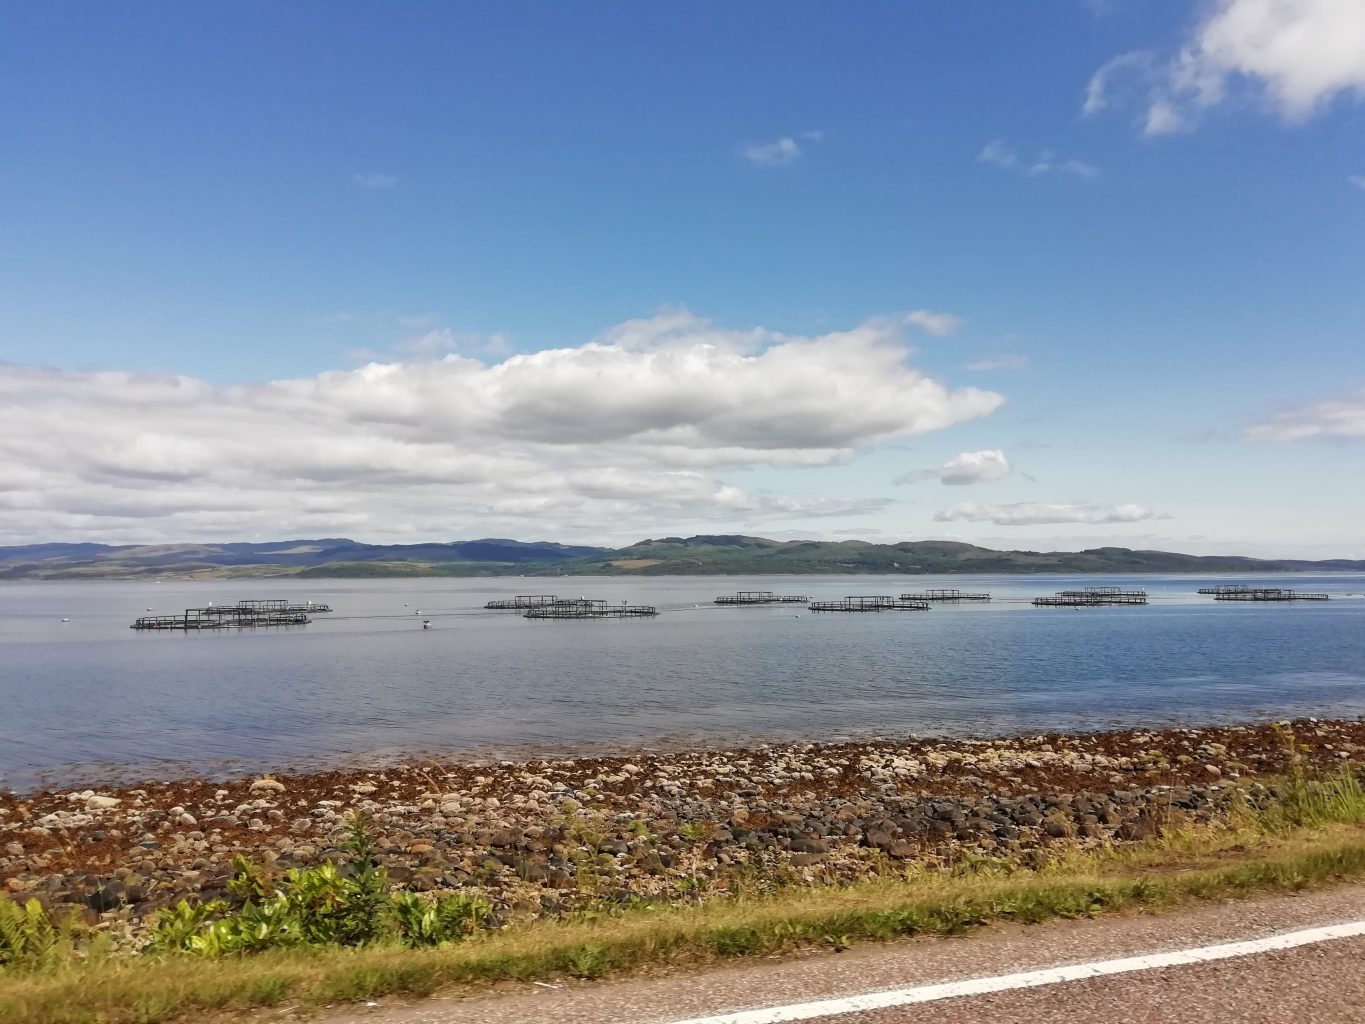 Following the recent review of aquaculture regulation, what’s next for Scottish salmon farming?